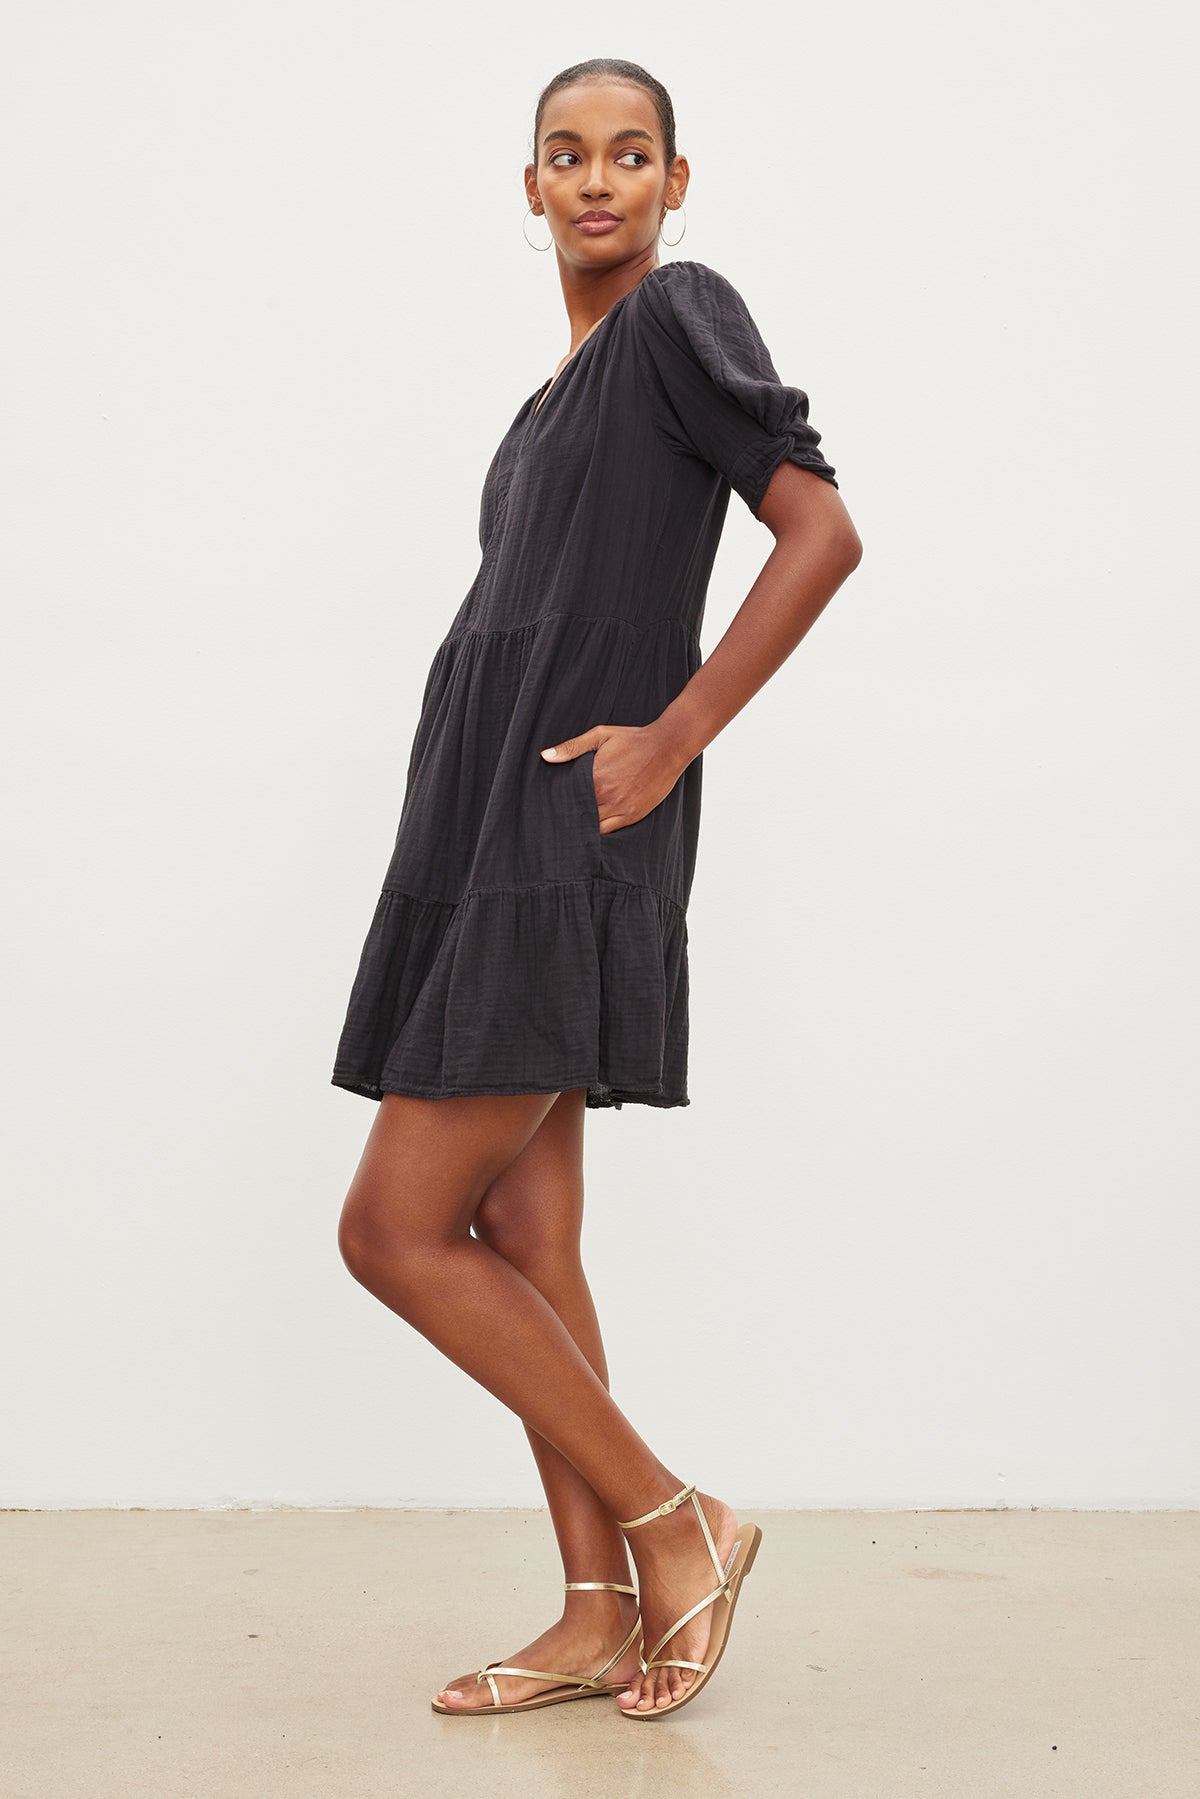   The model is wearing a Velvet by Graham & Spencer black BELLA COTTON GAUZE DRESS with a ruffle sleeve and sandals. 